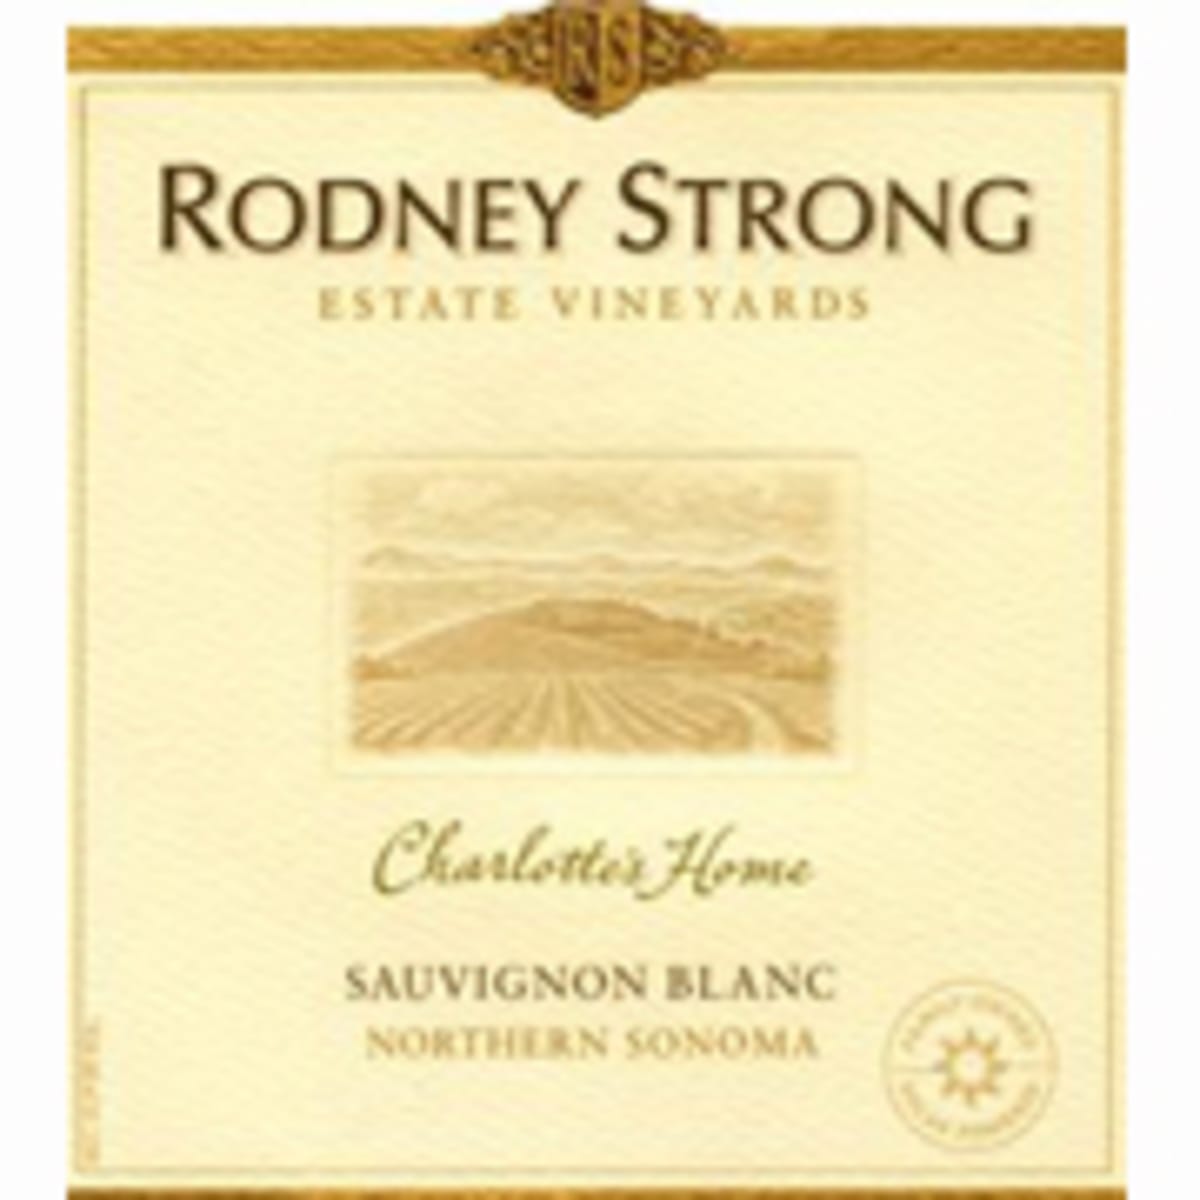 Rodney Strong Charlotte's Home Sauvignon Blanc 2011 Front Label